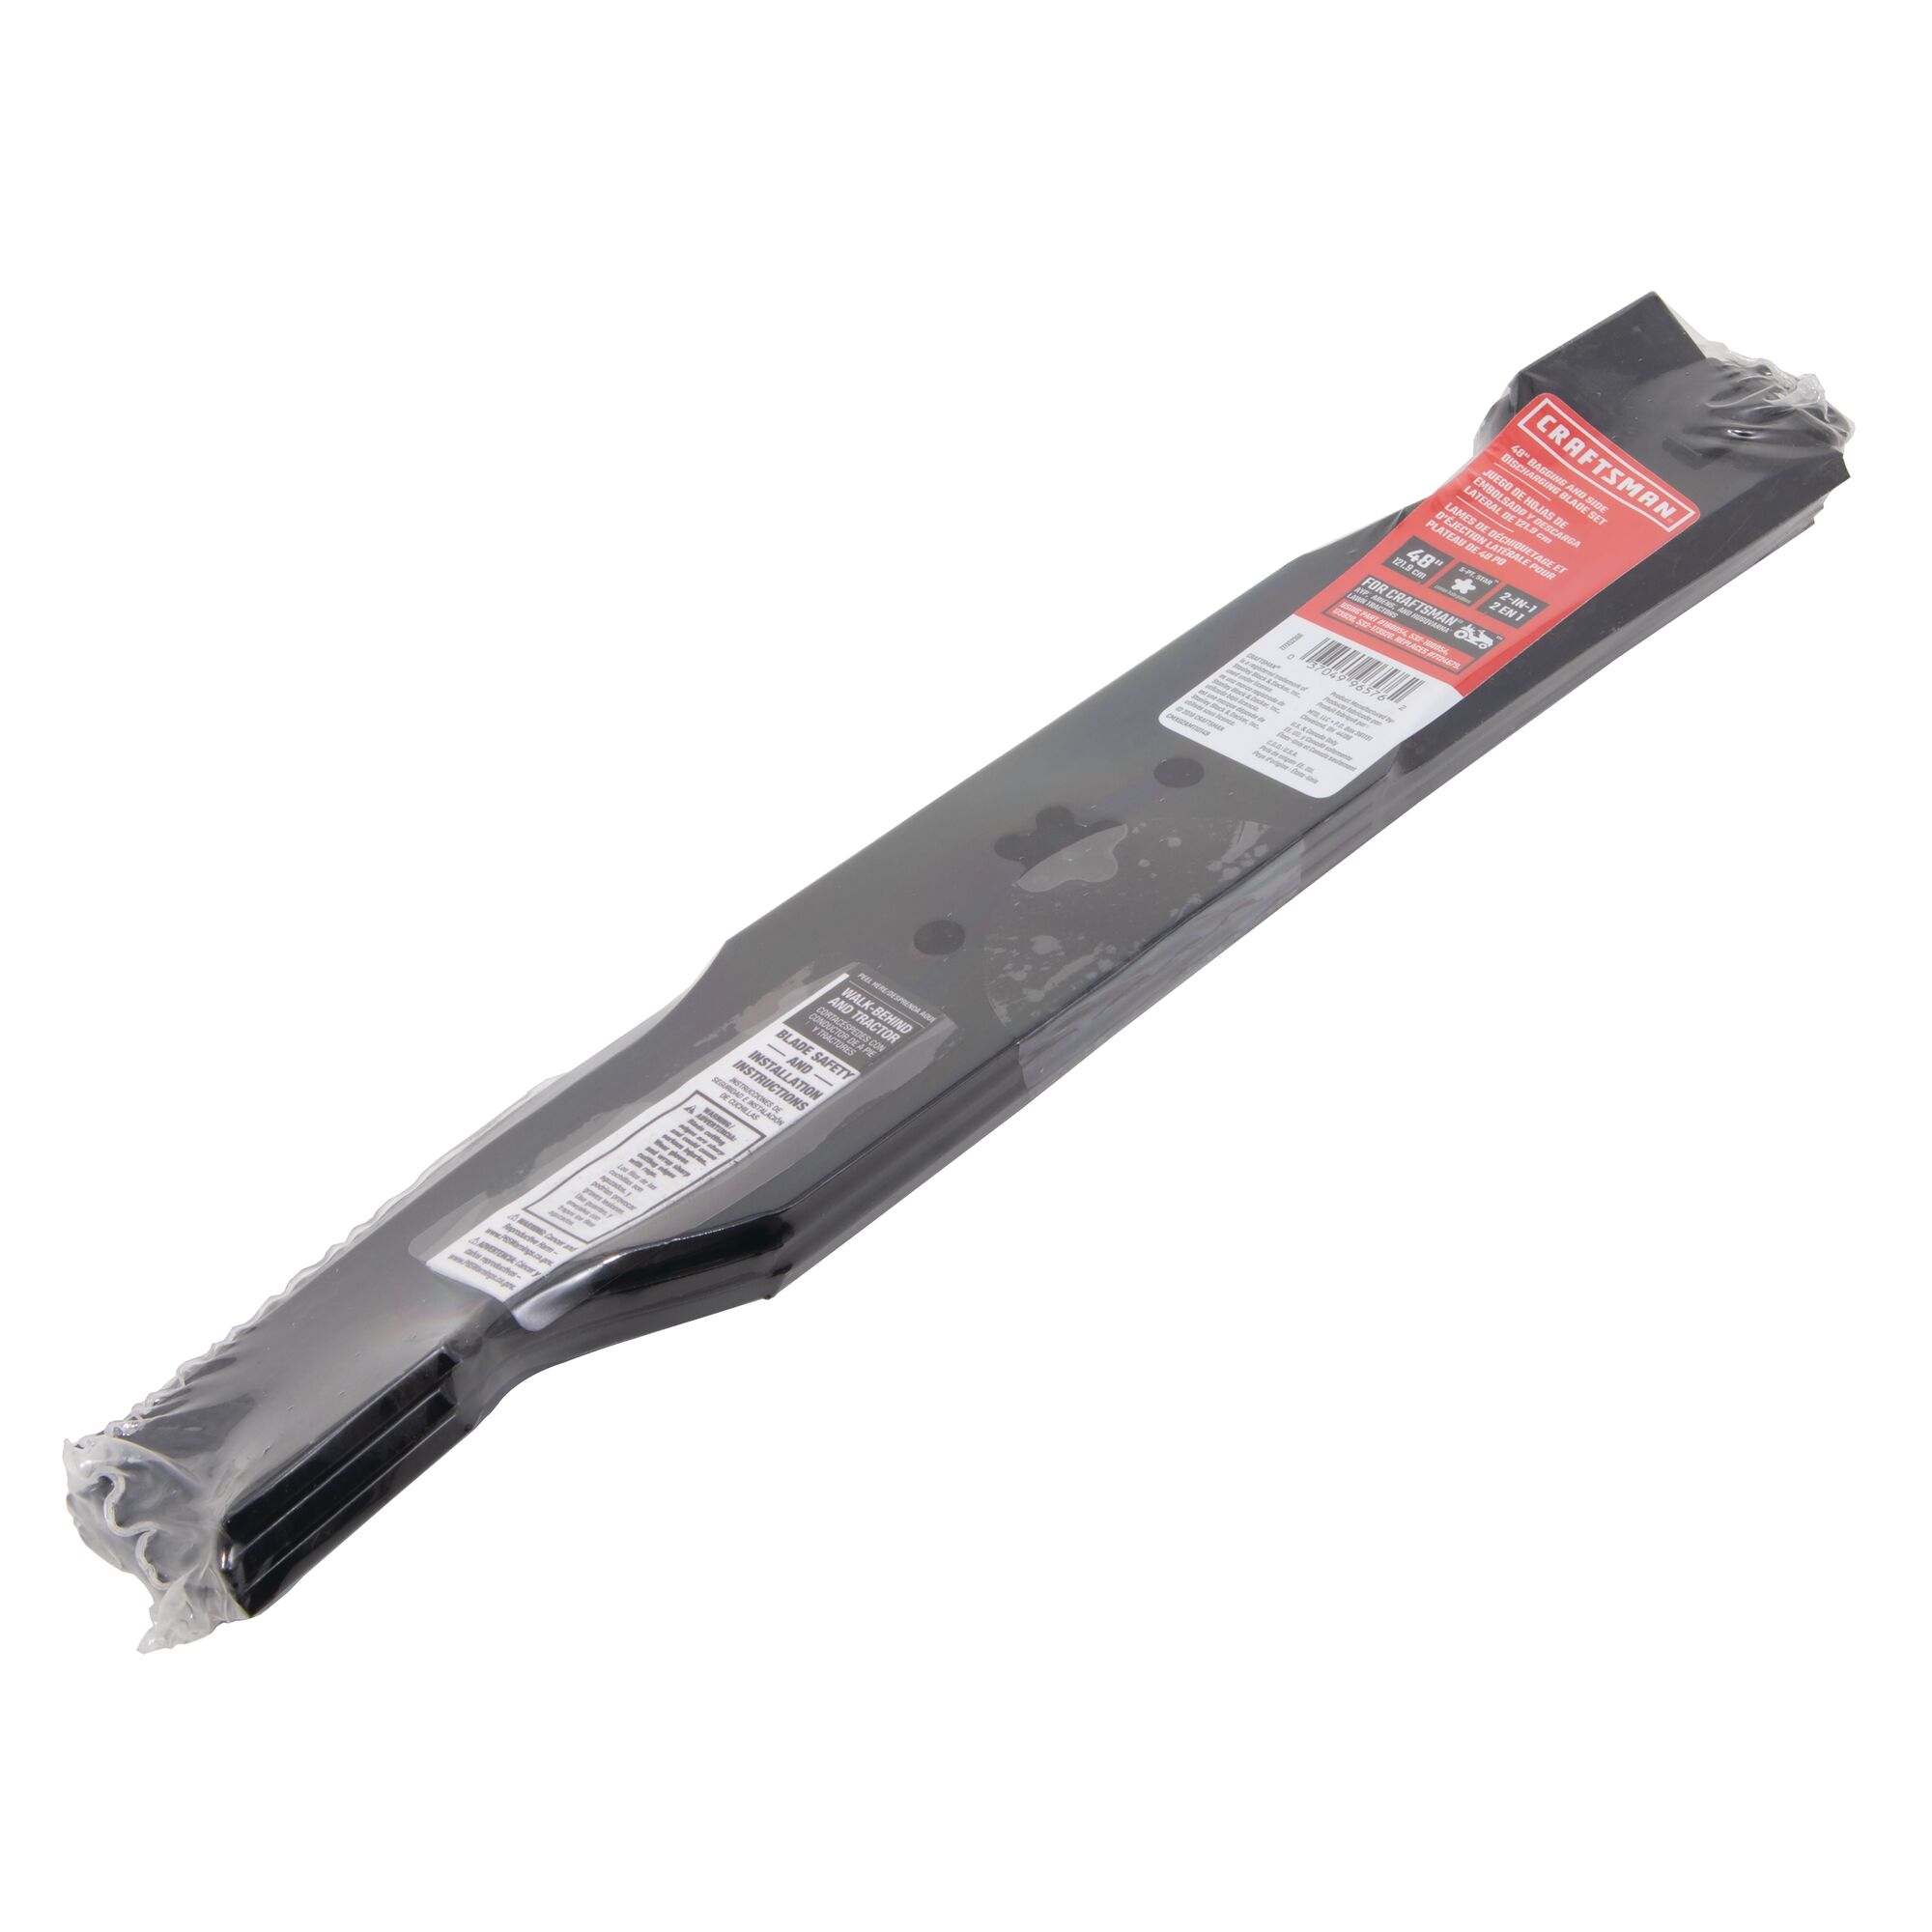 Profile of 48 Inch Bagging and Side Discharging Blade Set in plastic packaging.